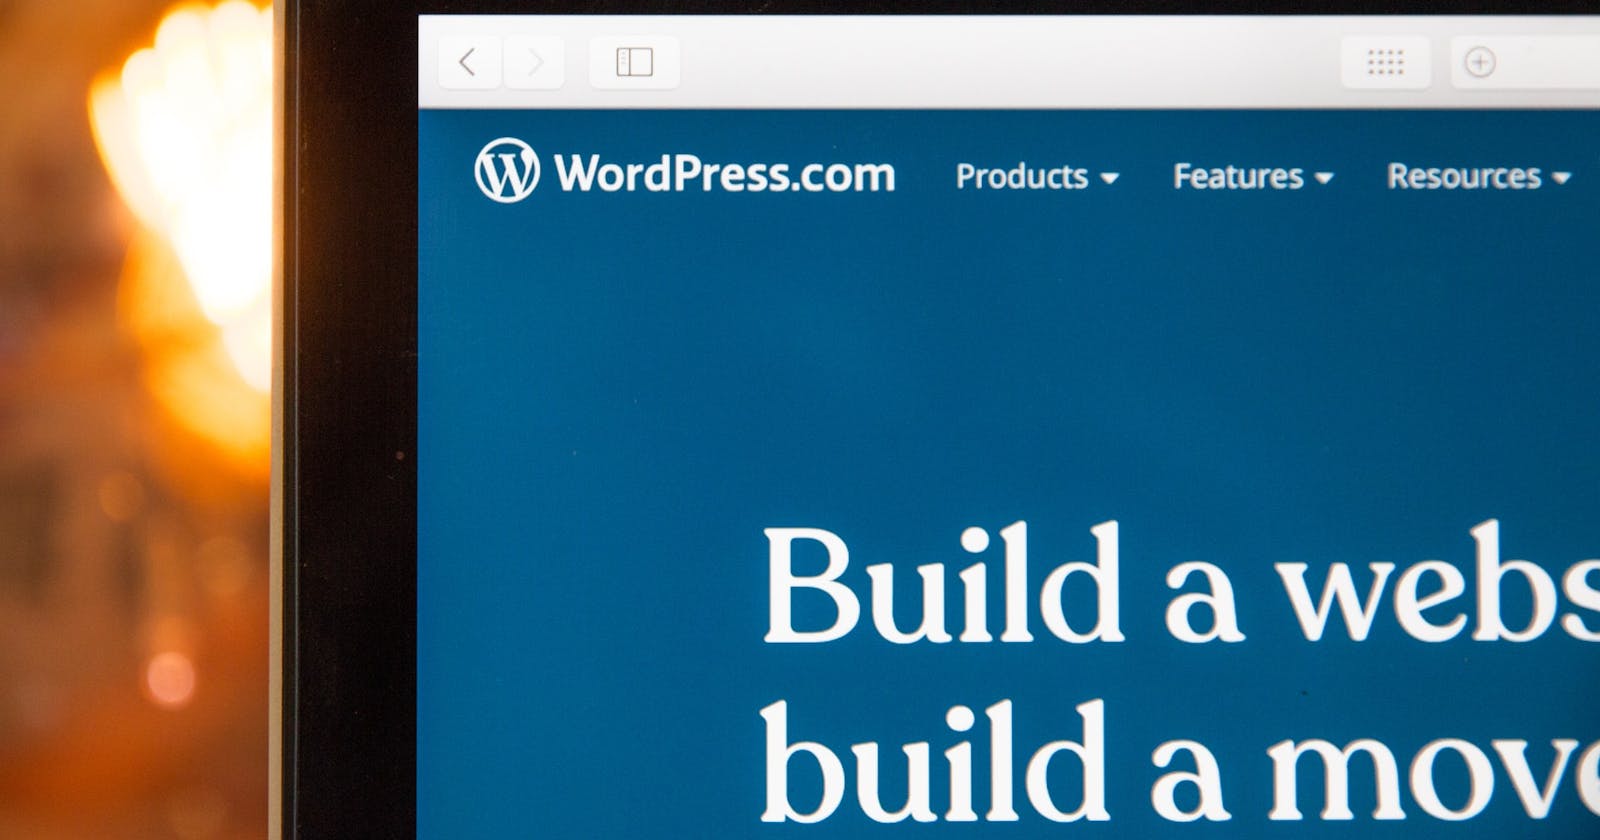 Why Is WordPress So Underrated?